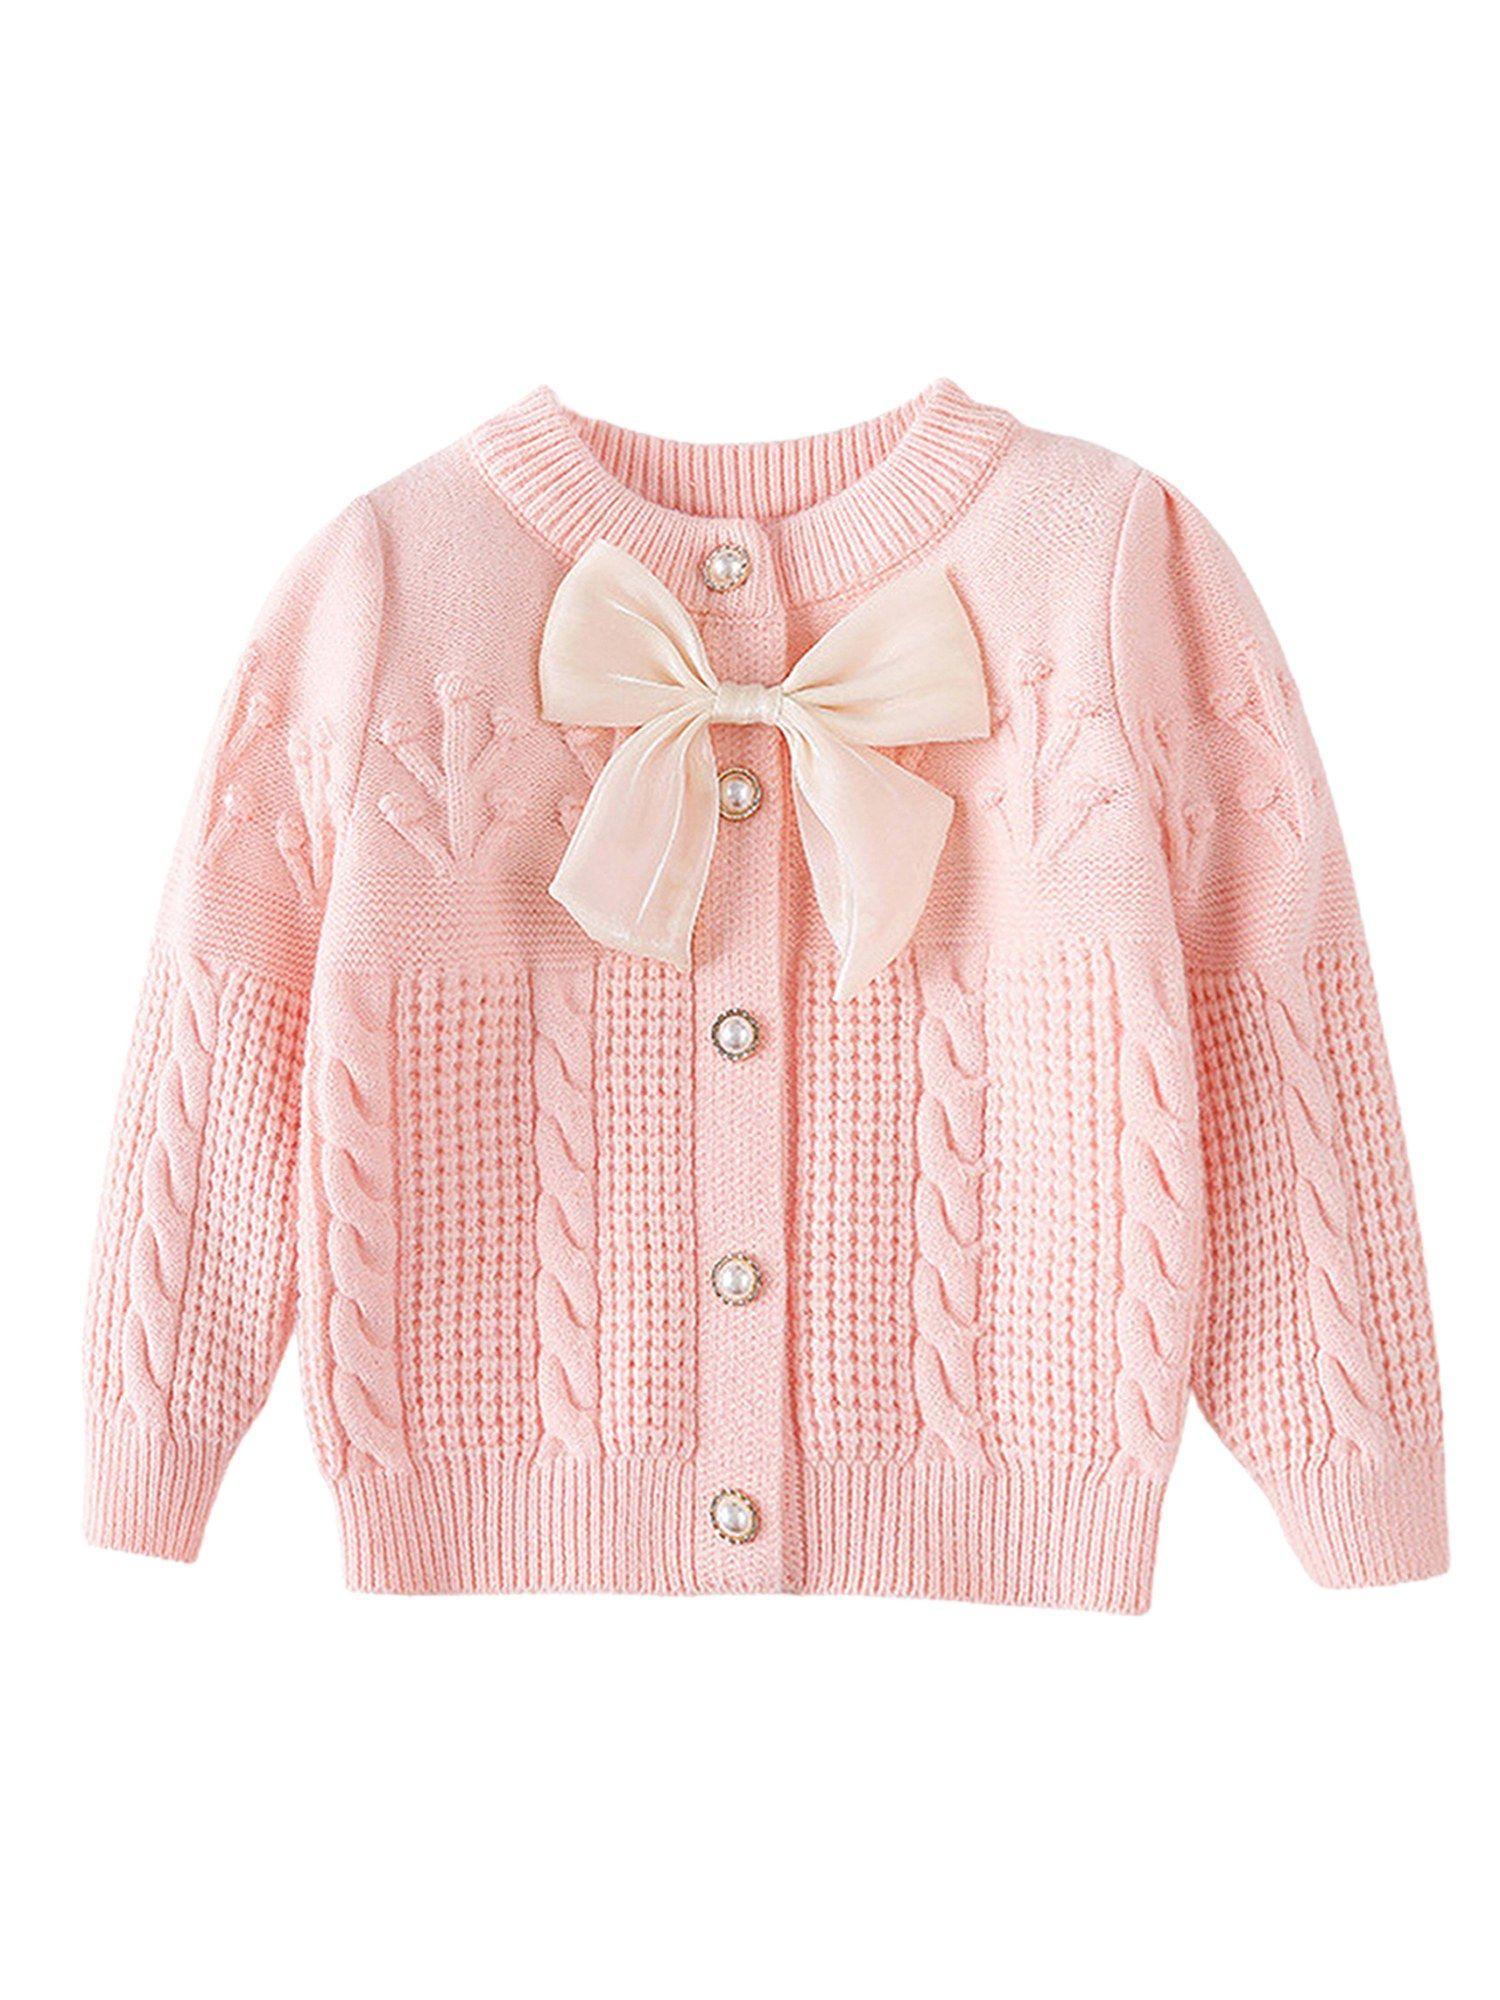 Kids Baby Pink Knitted Cardigan Sweater With Bow